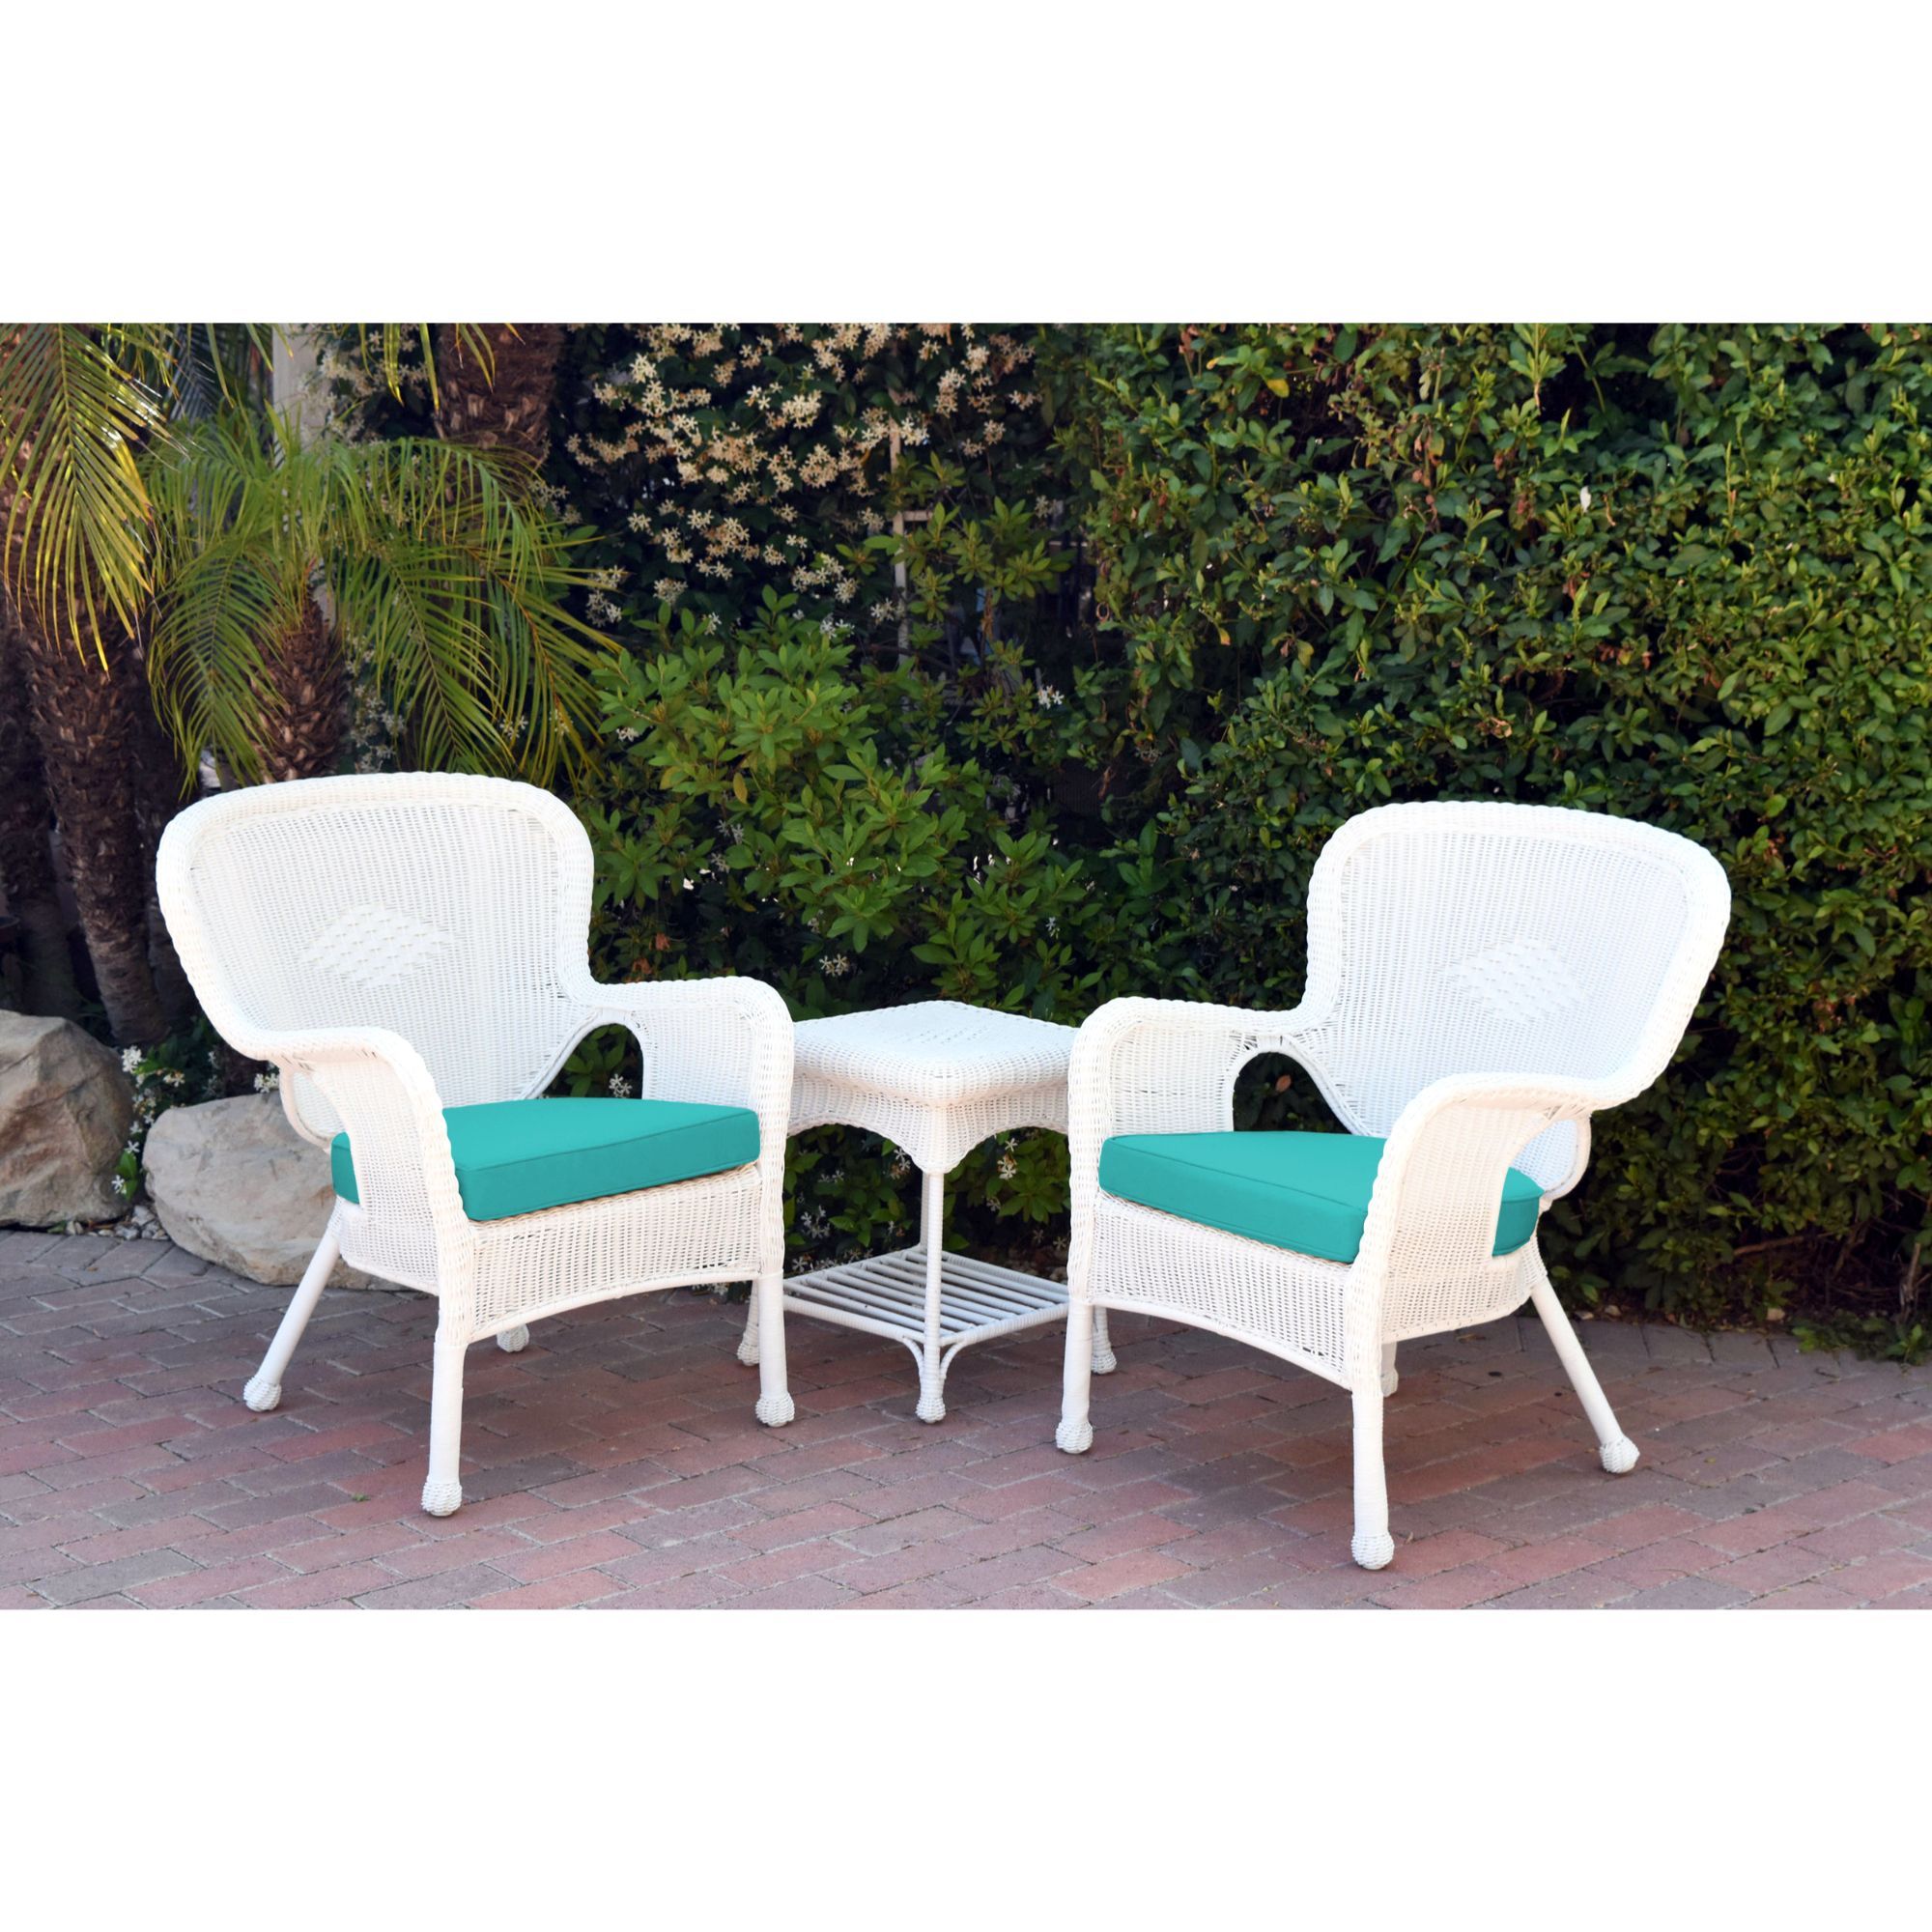 3 Piece White Resin Wicker Outdoor Furniture Patio Conversation Set Throughout Green Rattan Outdoor Rocking Chair Sets (View 13 of 15)